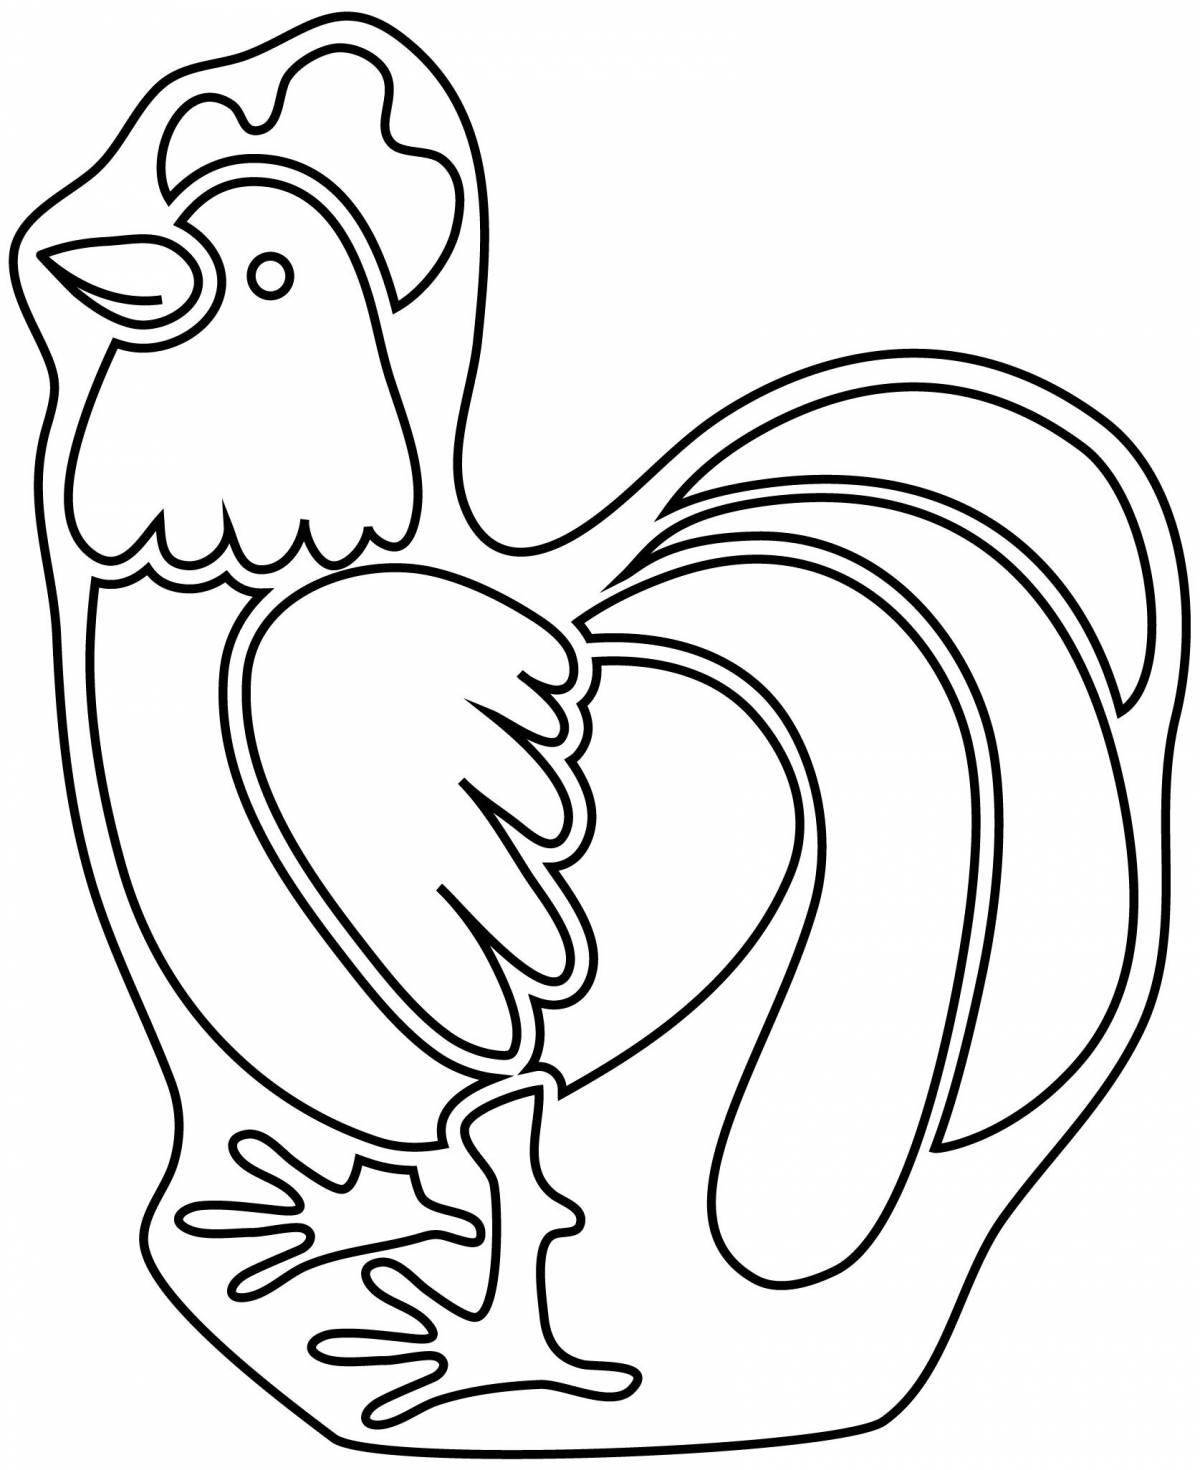 Coloring book cheerful rooster for children 3-4 years old